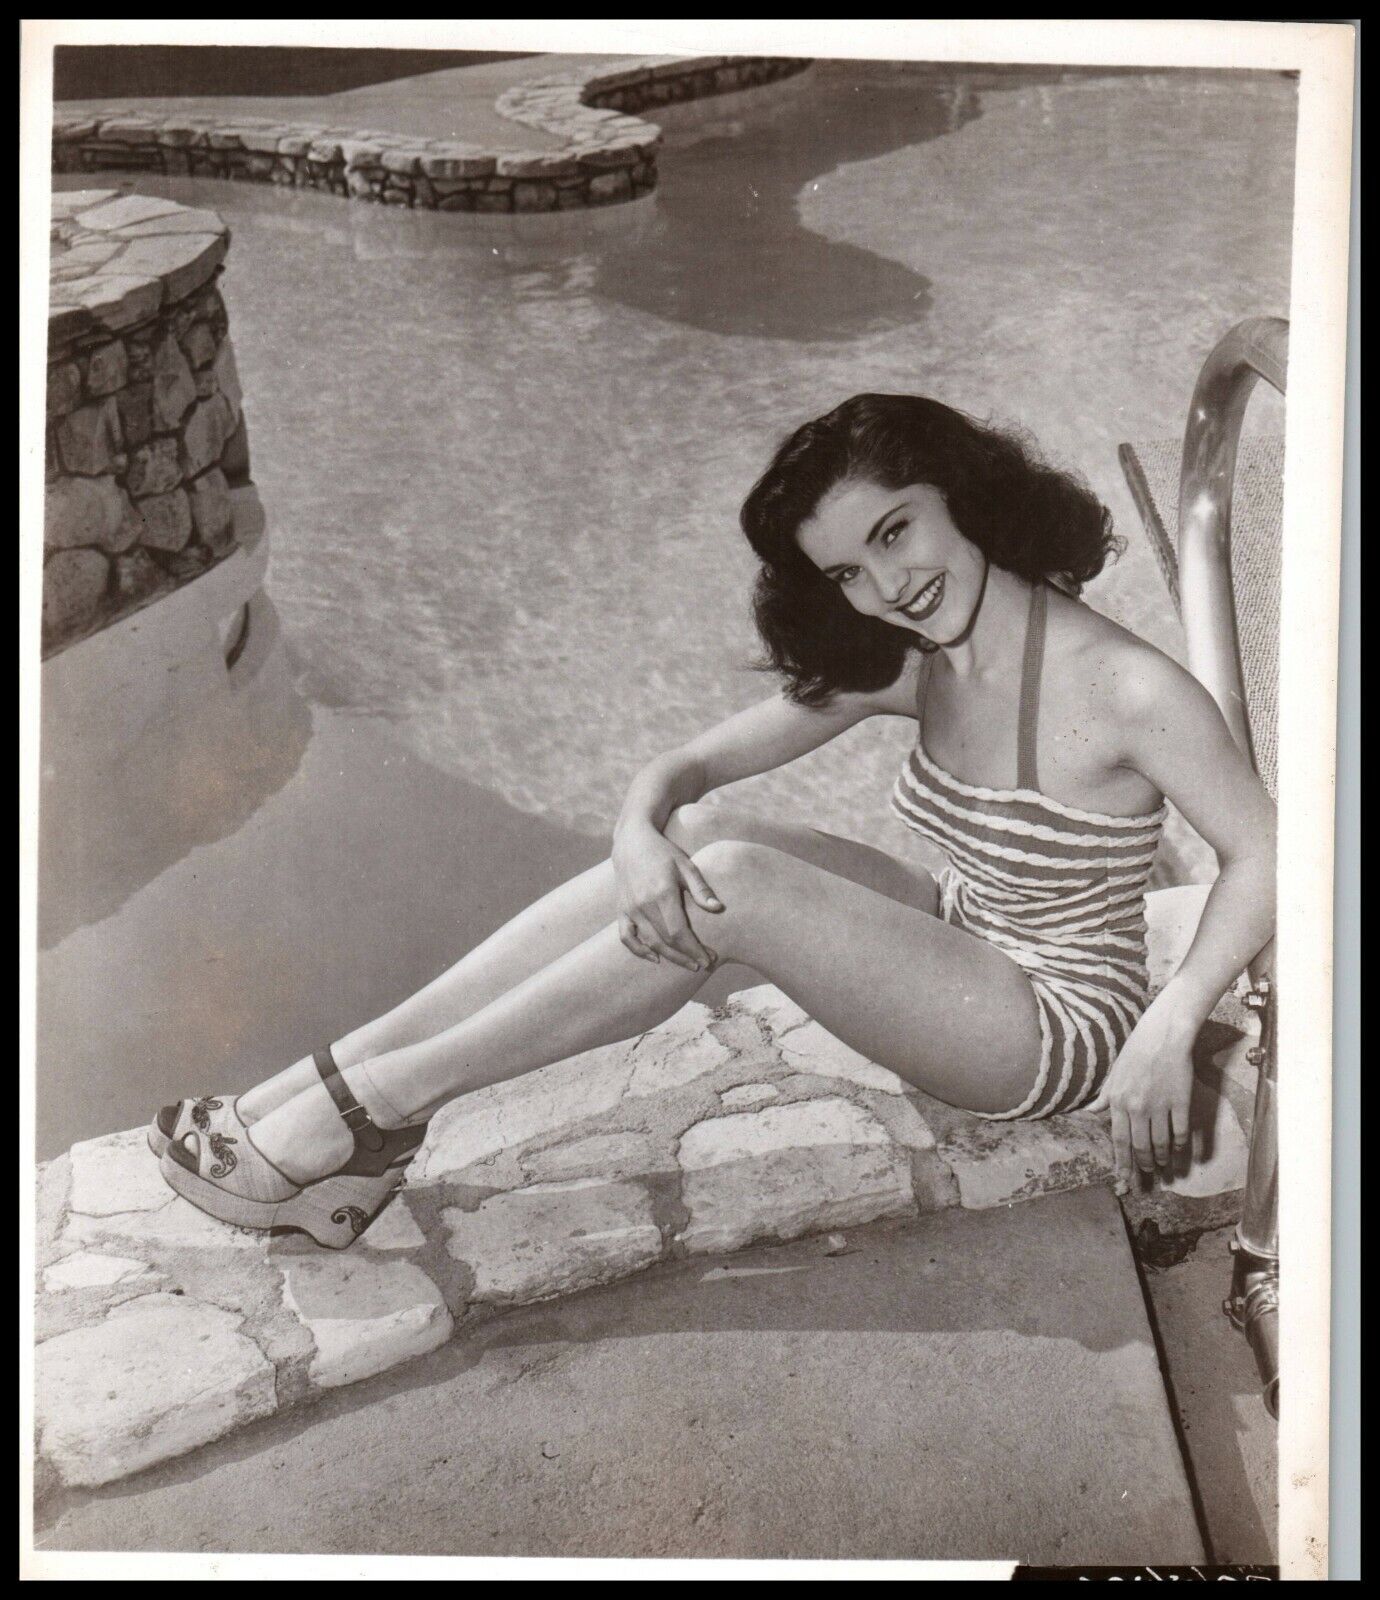 Hollywood Beauty Gorgeous Pin-Up CHEESECAKE SWIMSUIT Debra Paget 1950s Photo 372